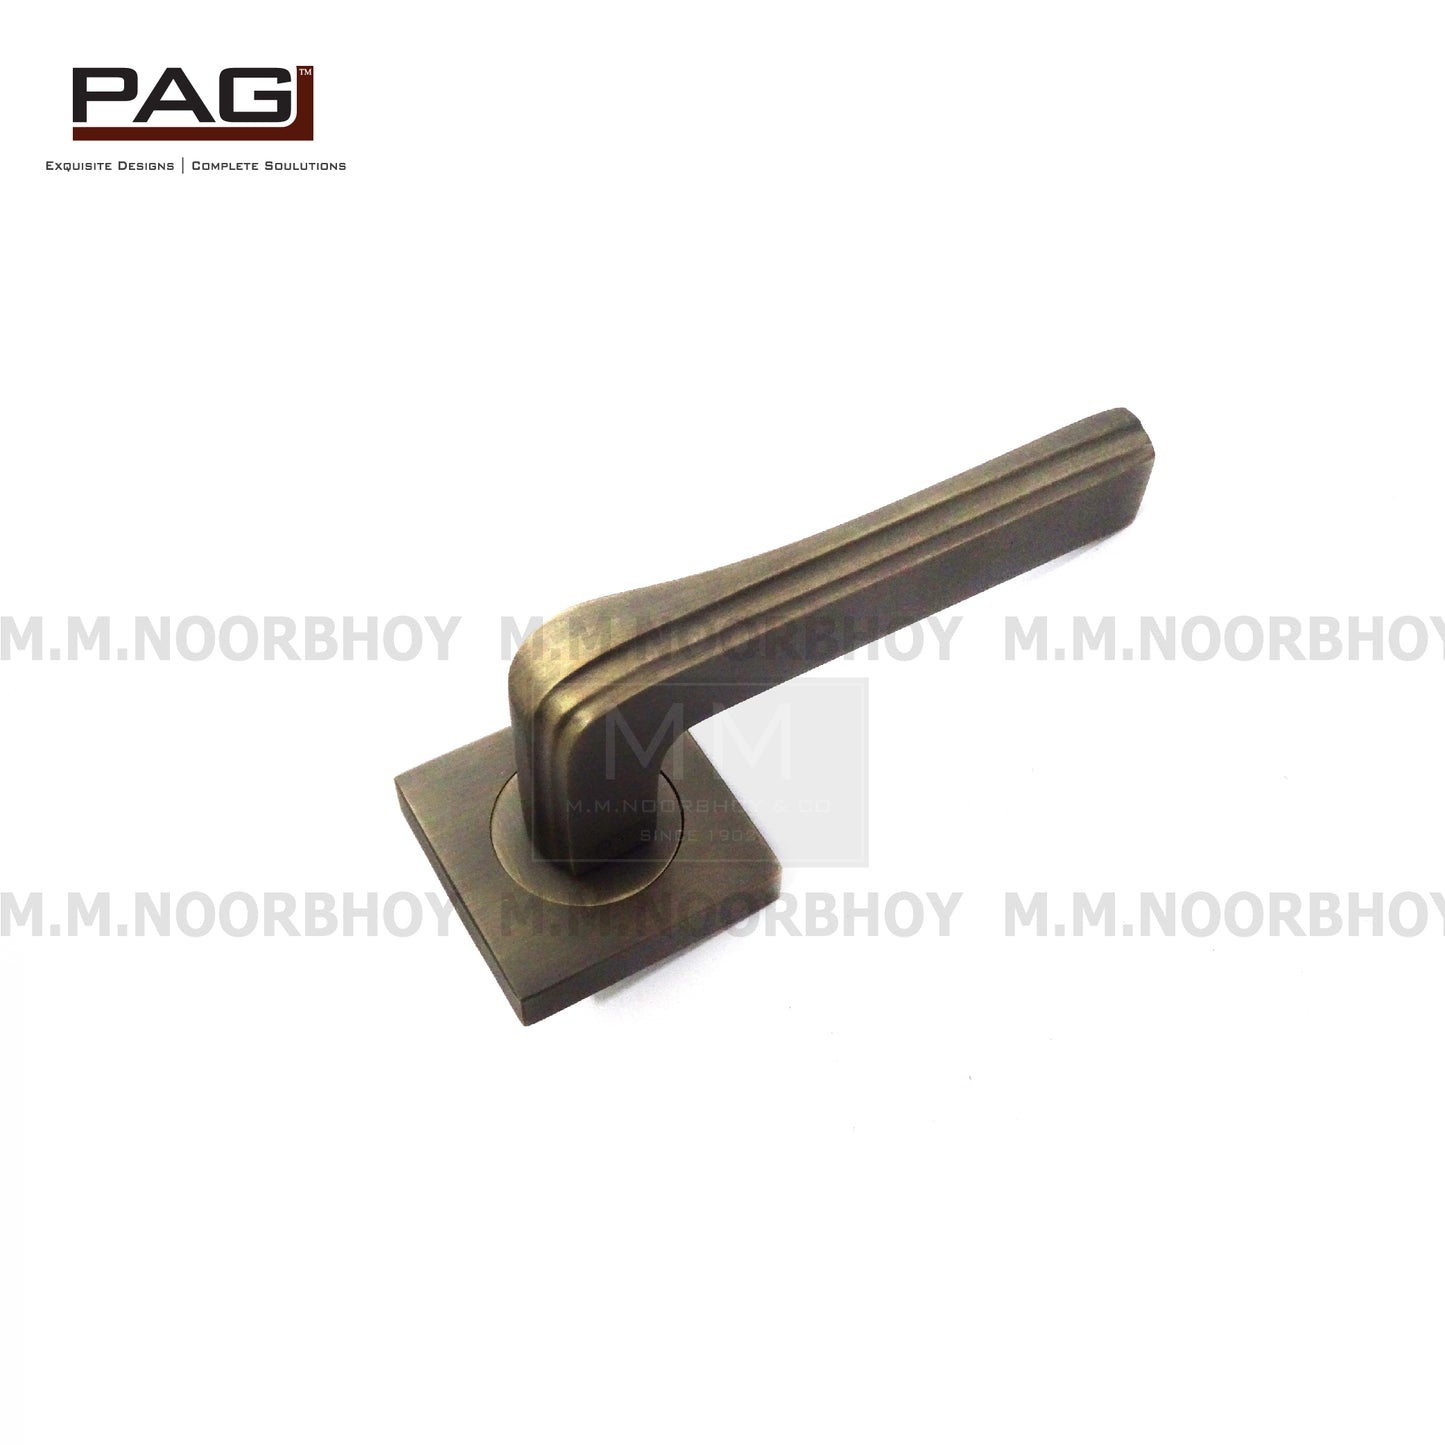 Pag Main Door Lever Handle With Key Holes , Brass Antique Bronze & Chrome Polish Finish - G95126